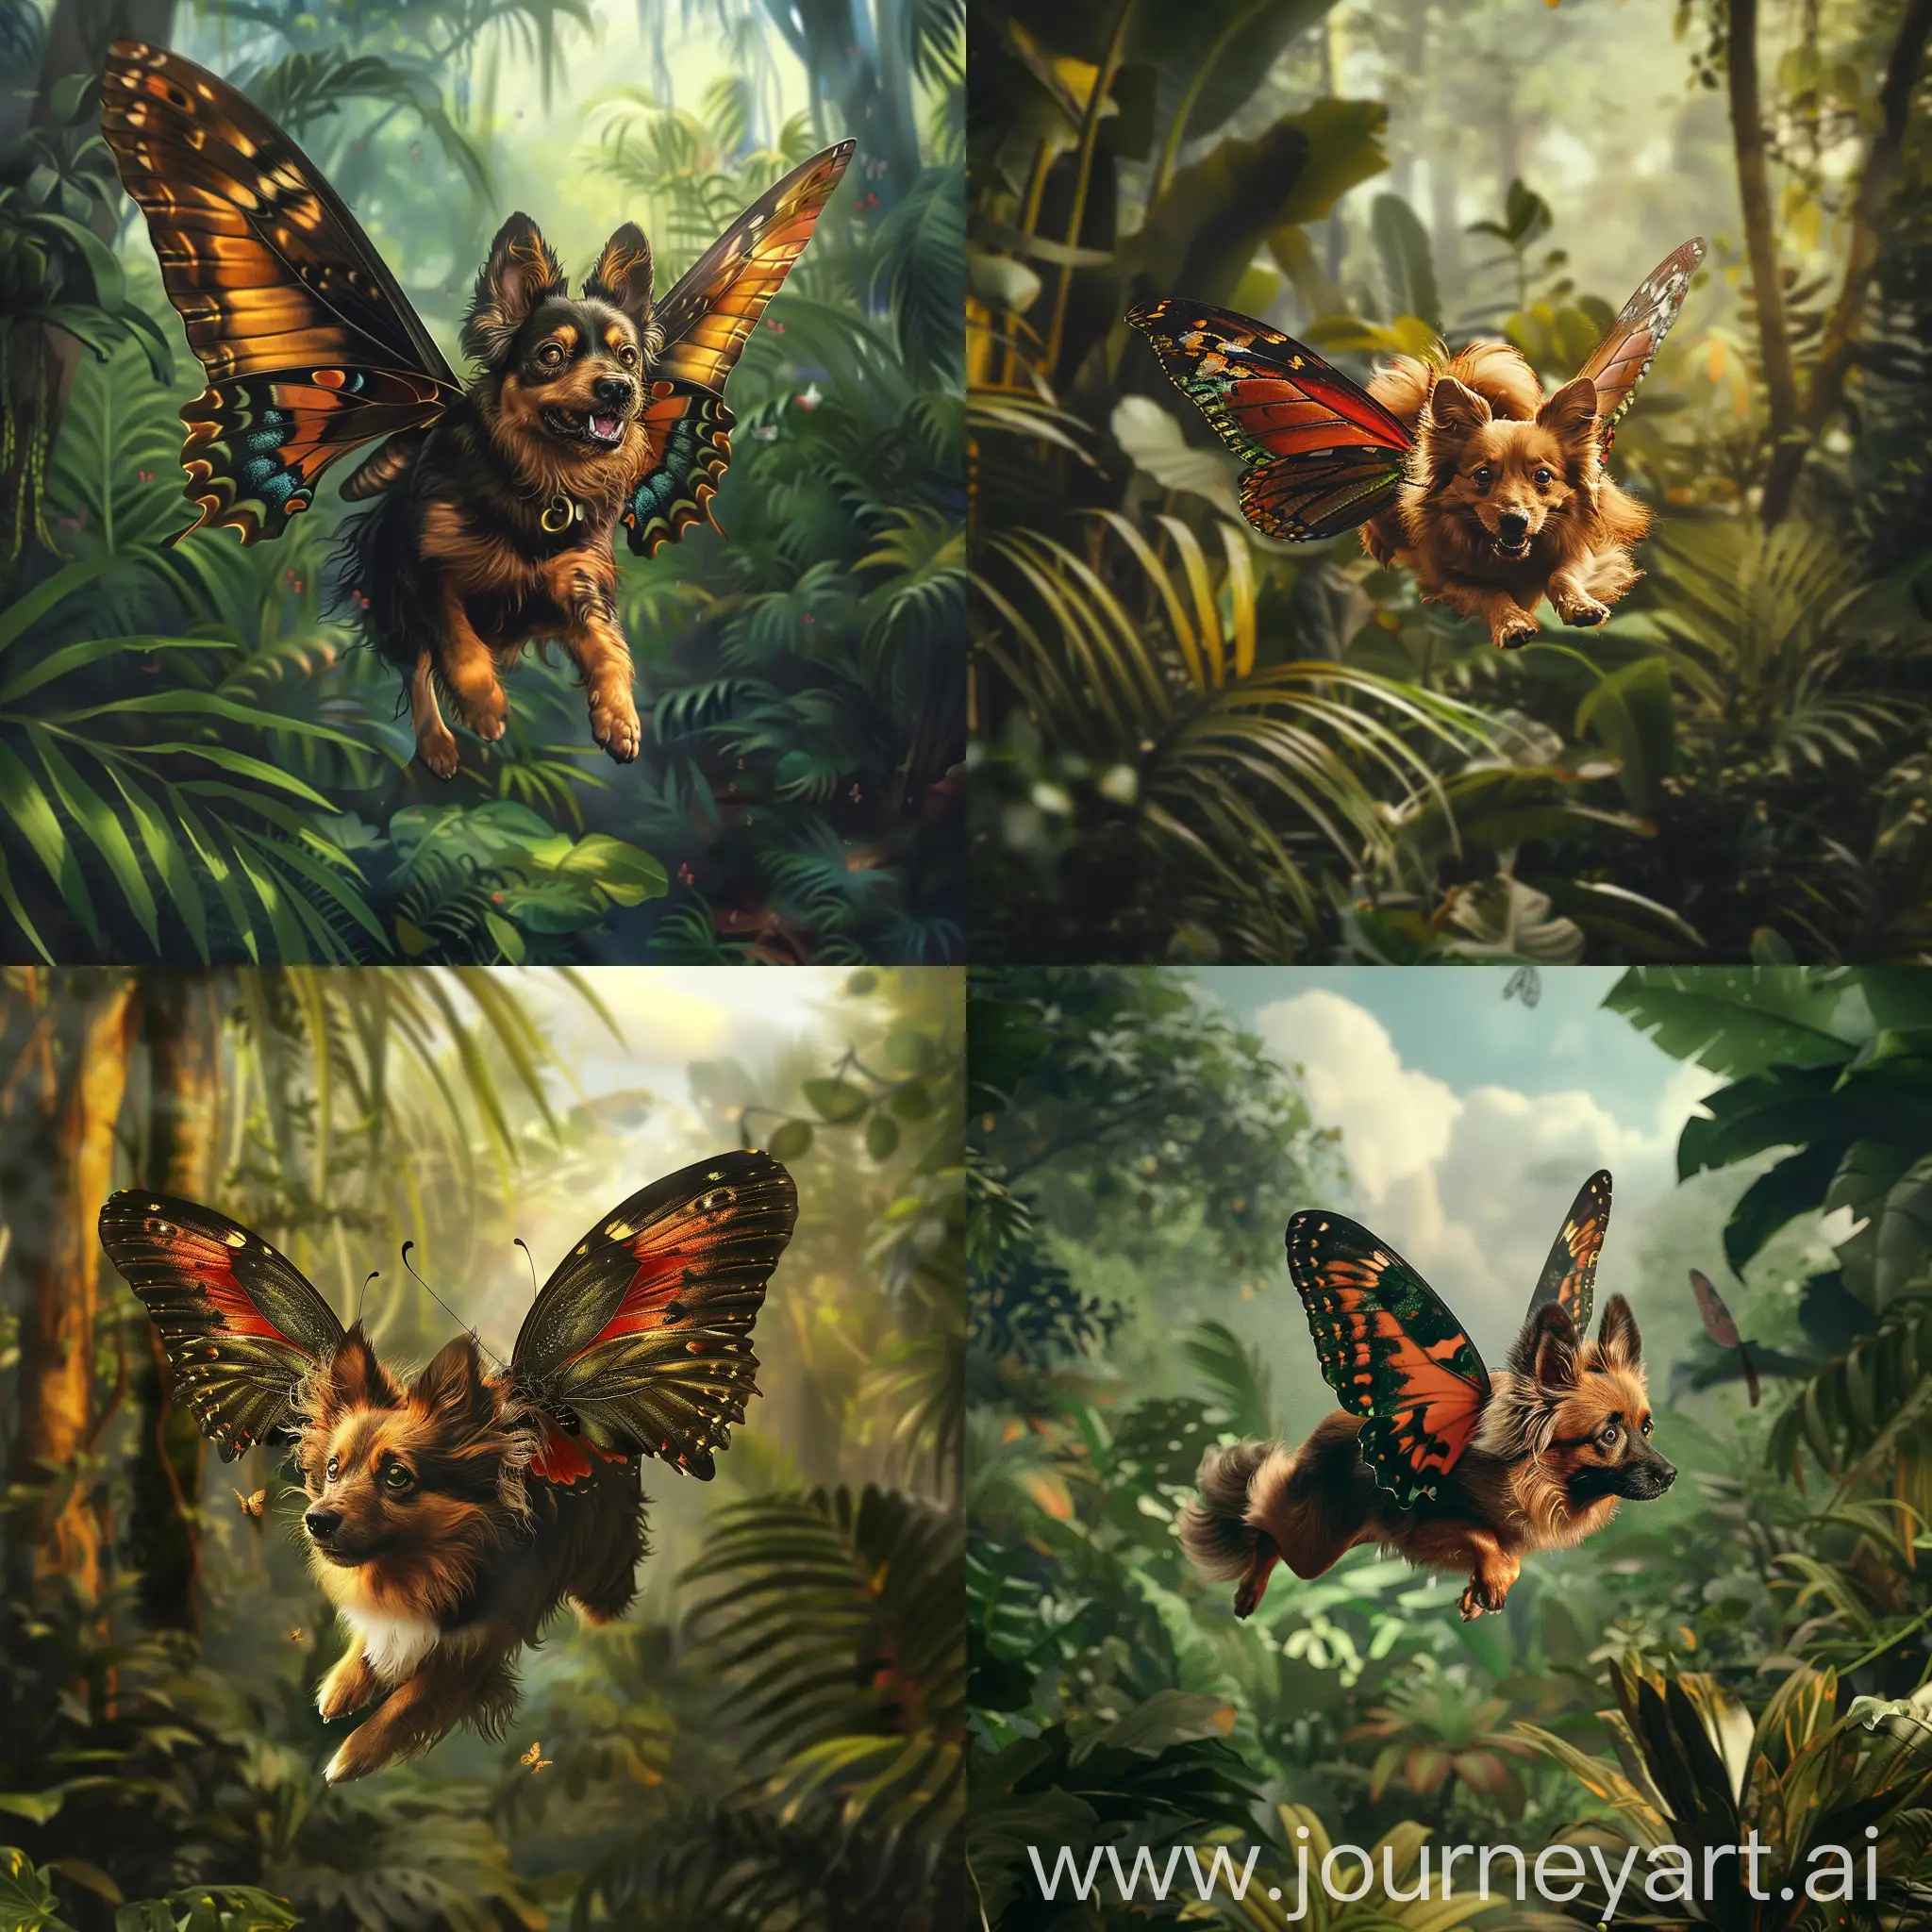 German-Spitz-with-Butterfly-Wings-Soaring-Through-Lush-Jungle-Landscape